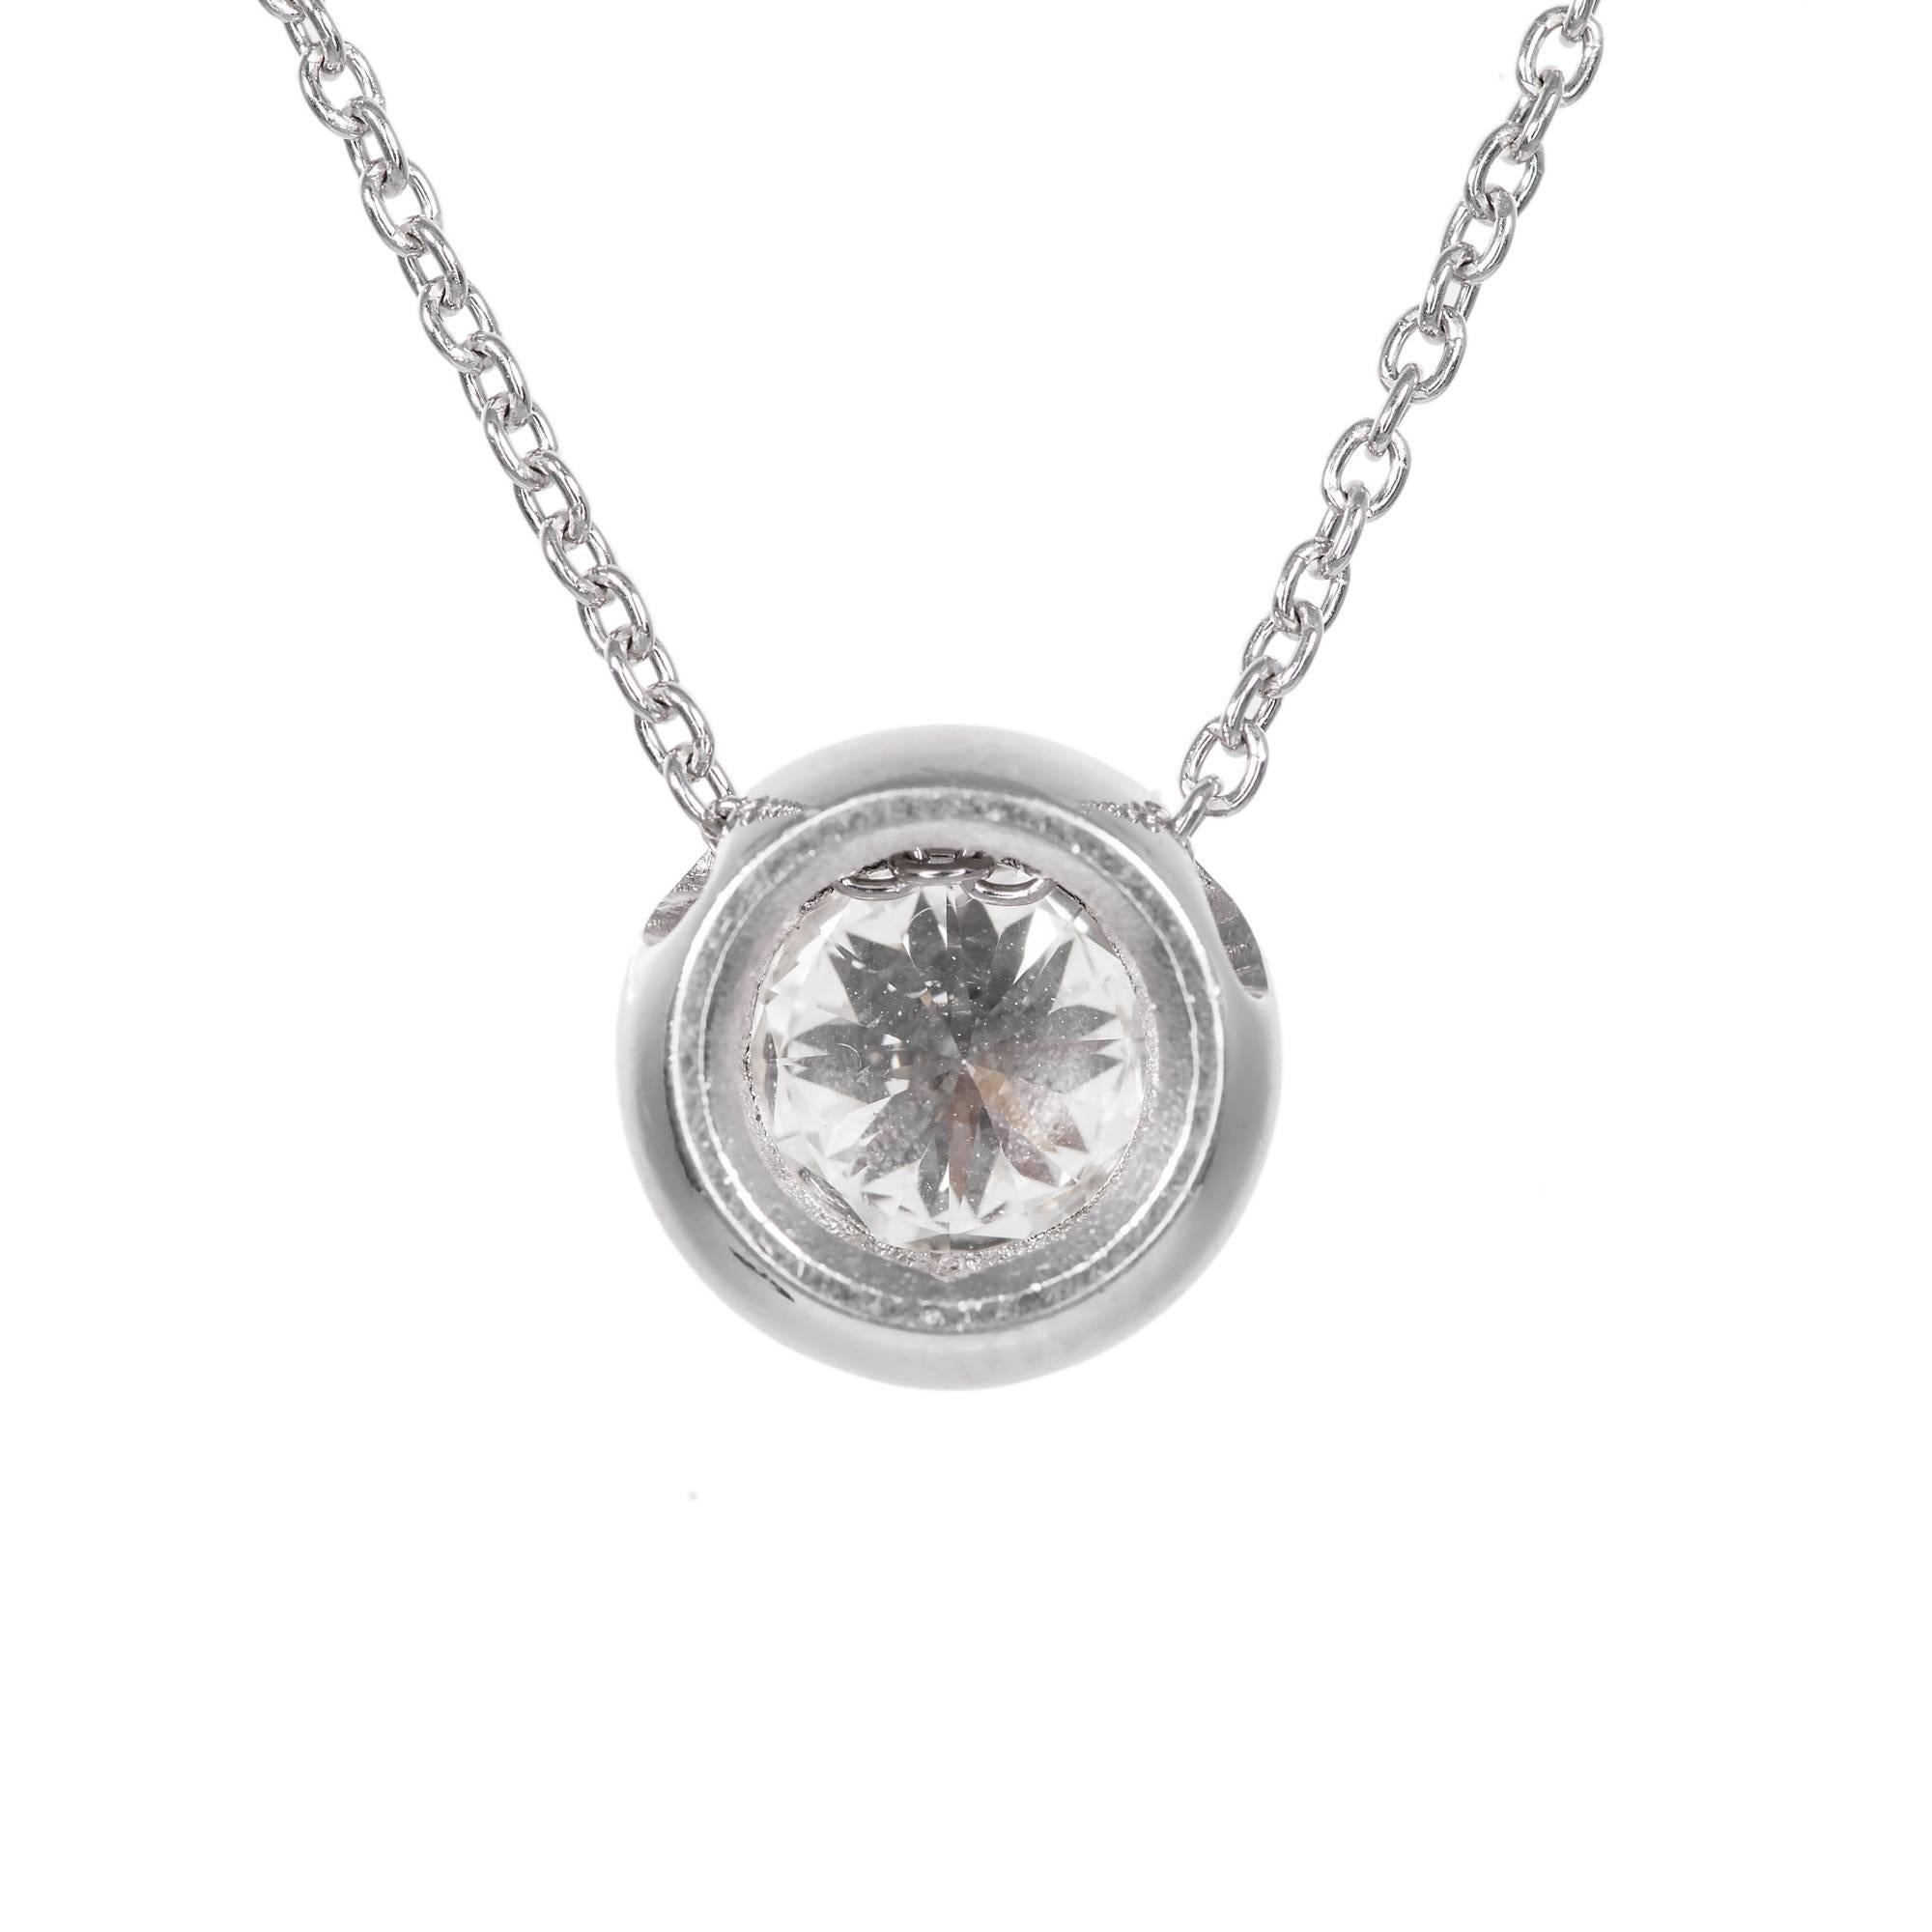 Handmade Platinum slide on a solid Platinum 16 inch cable link chain with a secure lobster catch.  Pendant is brand new from the Peter Suchy Workshop.  The diamond is sparkly and well cut.  It is a European transitional Ideal cut. Symmetry good. 